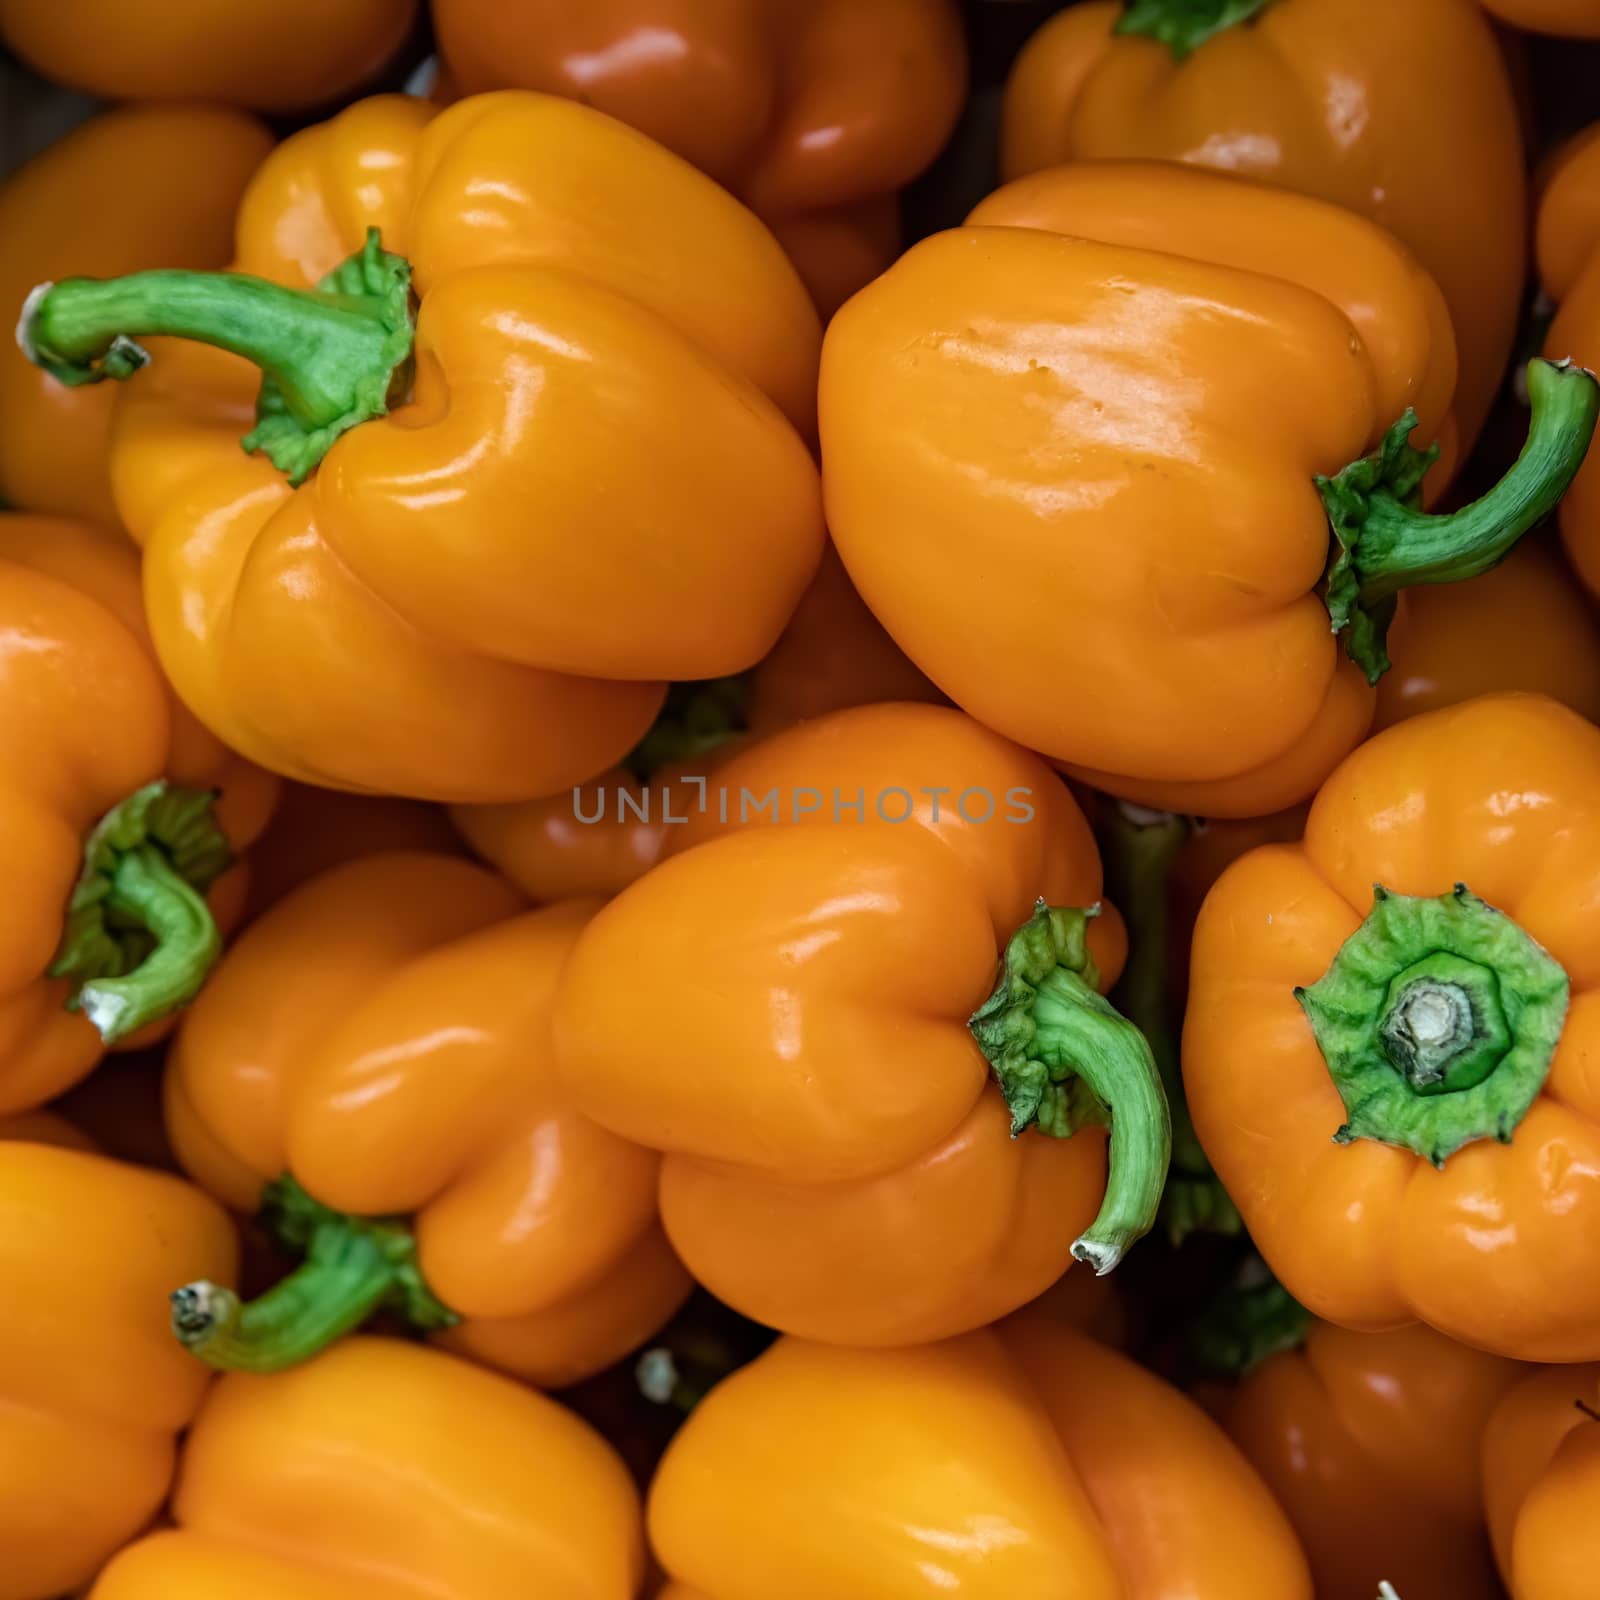 Lot of peppers at market place by bonilook